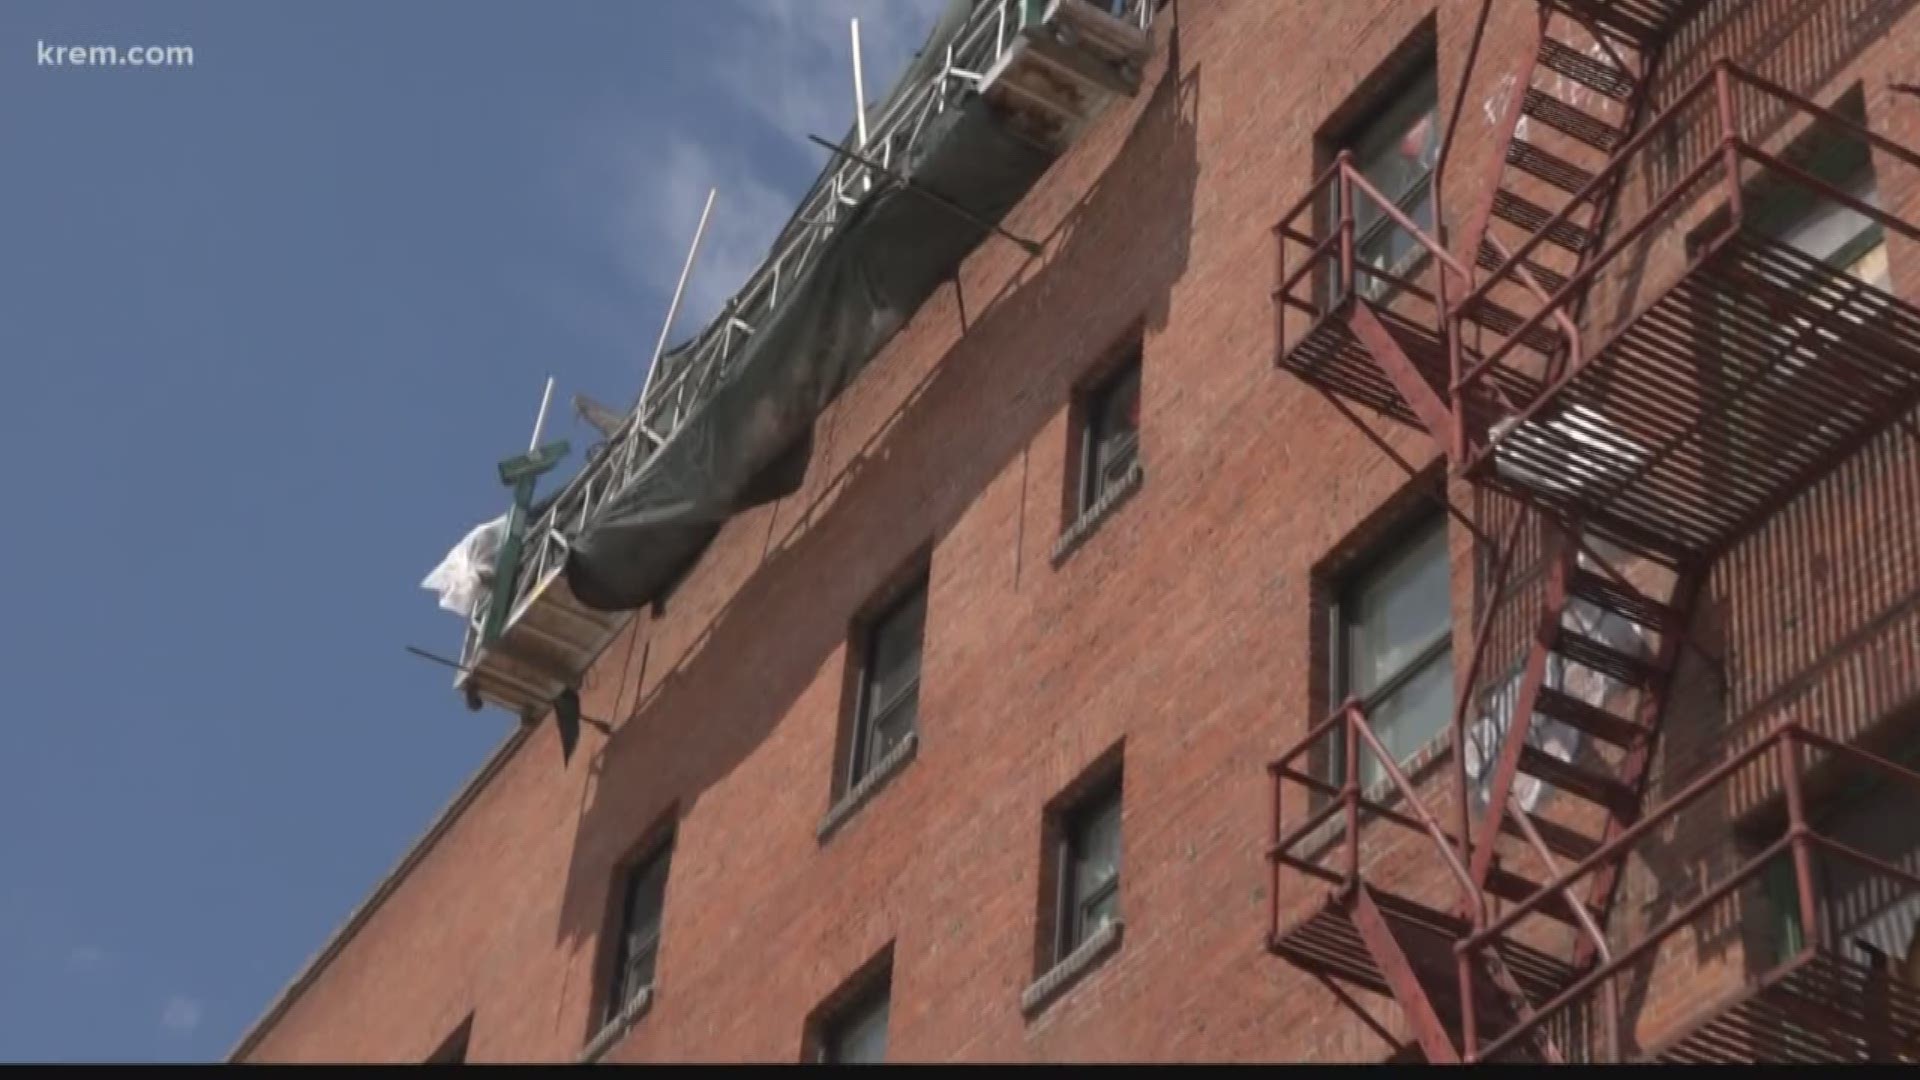 KREM's Shayna Waltower visited the Otis Hotel, which is getting closer to completing construction after the discovery of asbestos.